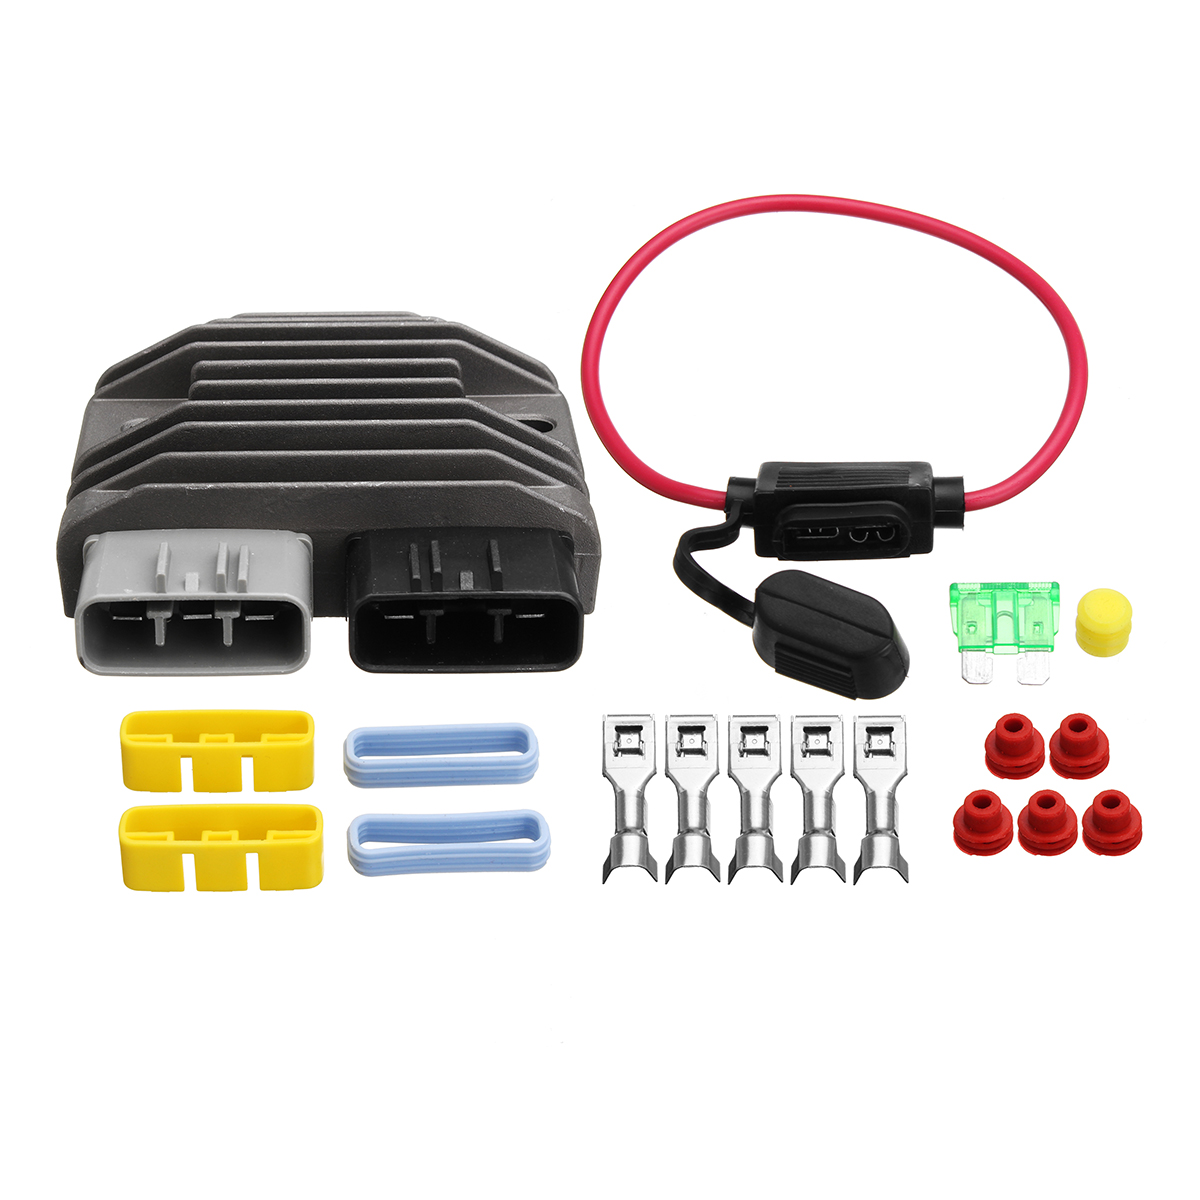 REGULATOR RECTIFIER KIT REPLACE For SHINDENGEN MOSFET # FH012AA FH020AA 